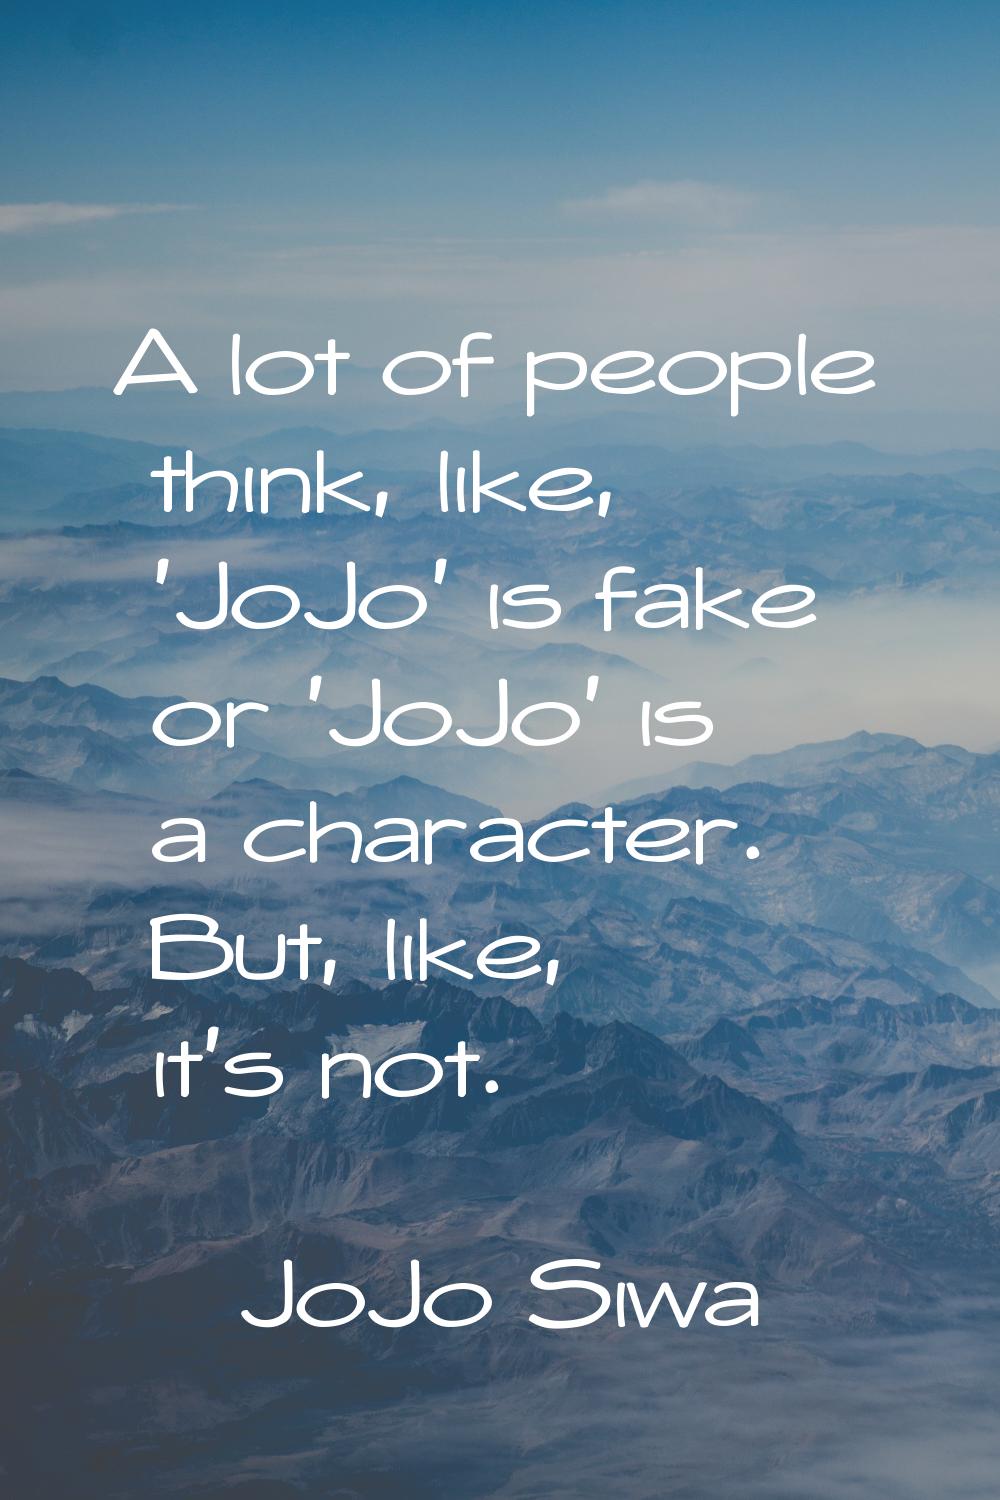 A lot of people think, like, 'JoJo' is fake or 'JoJo' is a character. But, like, it's not.